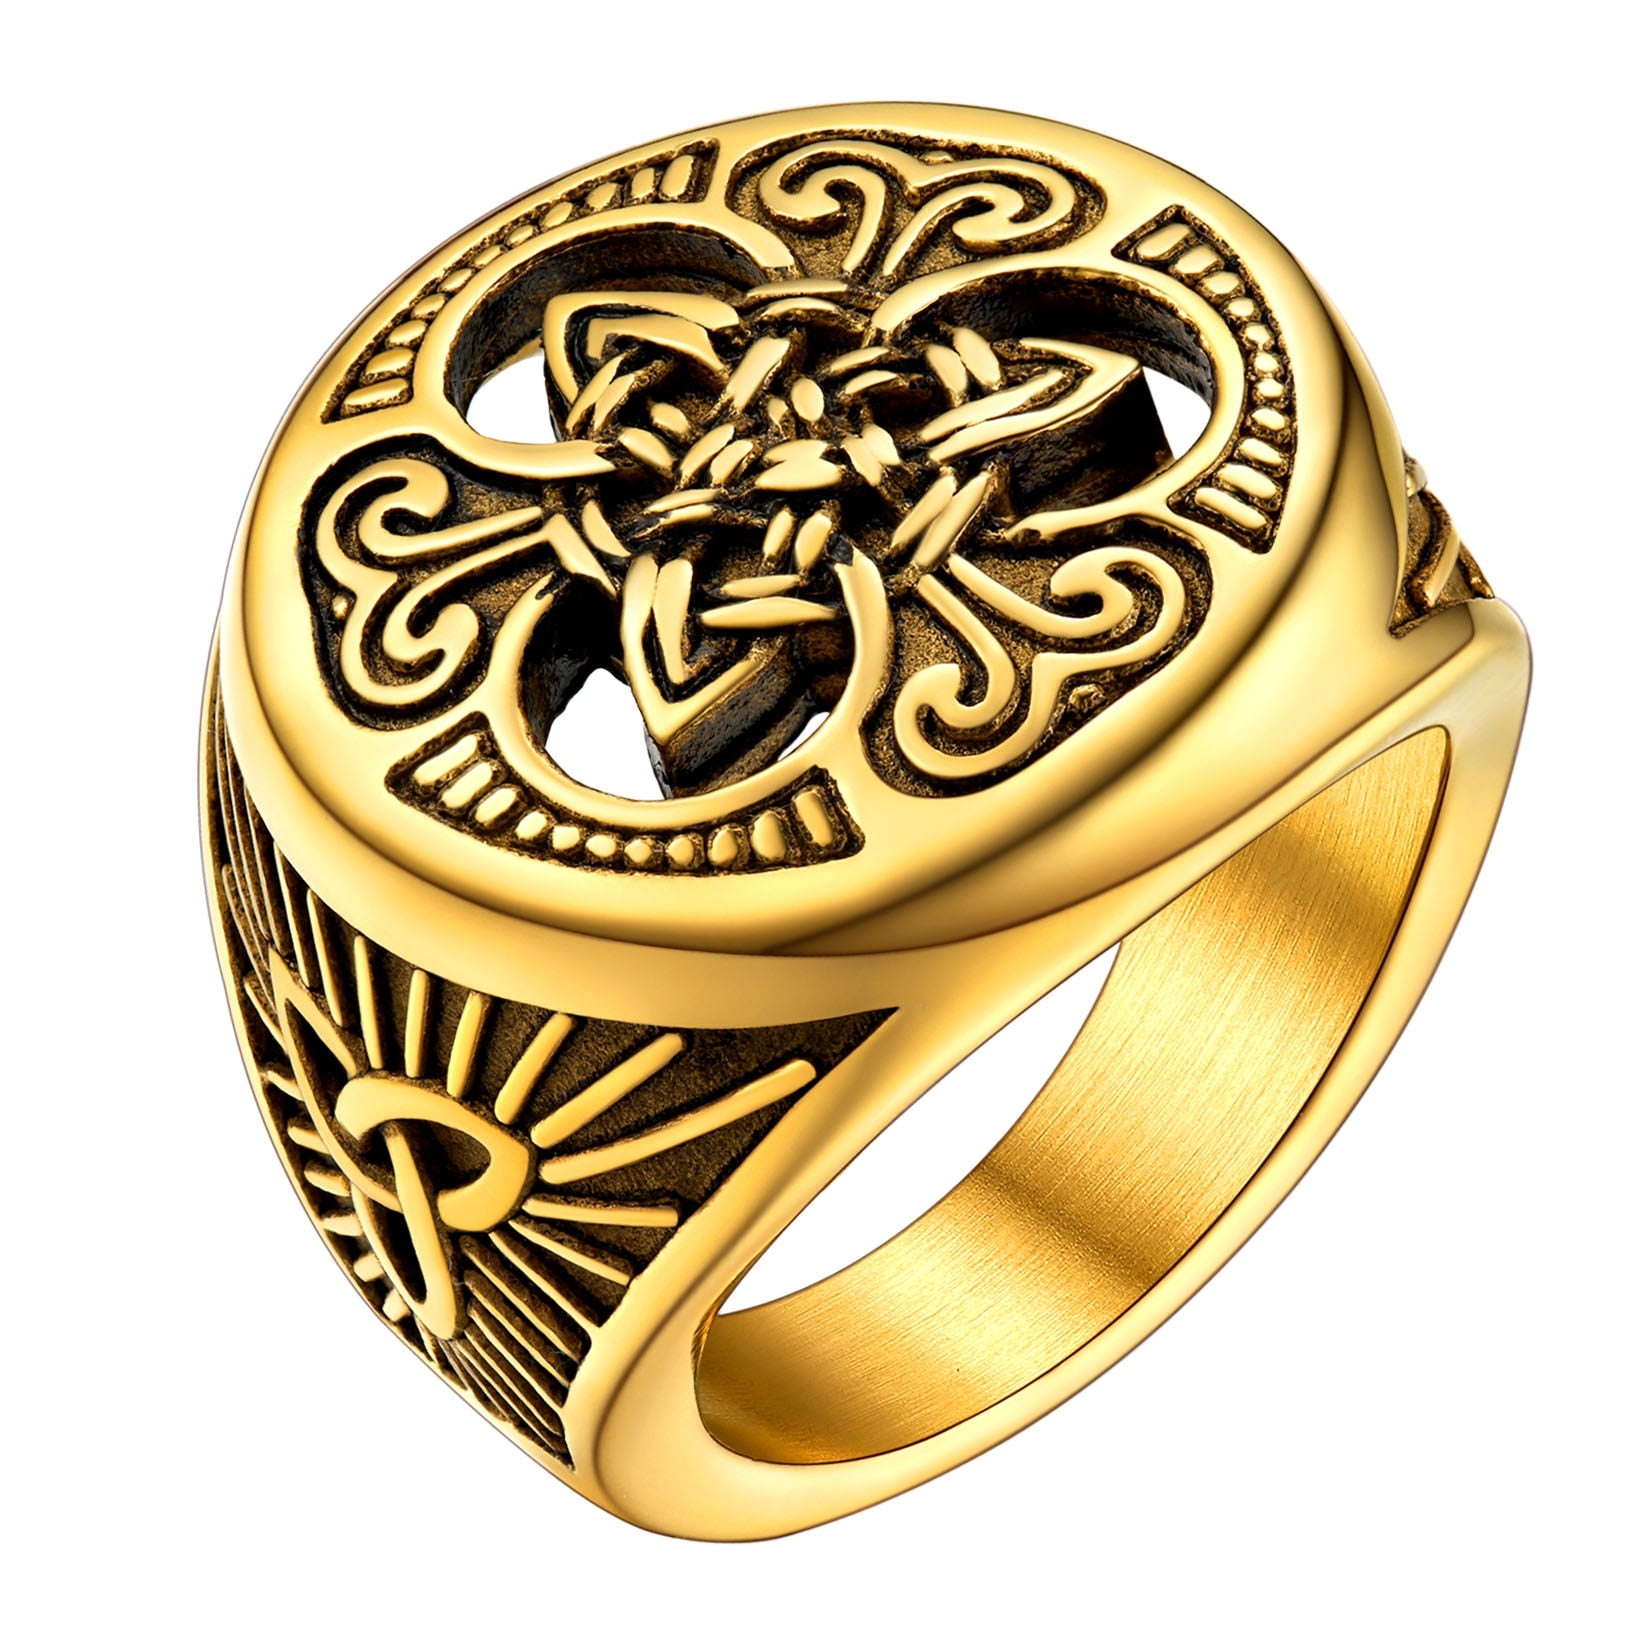 U7 Irish Celtic Knot Ring Antique Black Stainless Steel Triquetra Signet for Men Hip Hop Jewelry Size 7 to 12 R202 Black